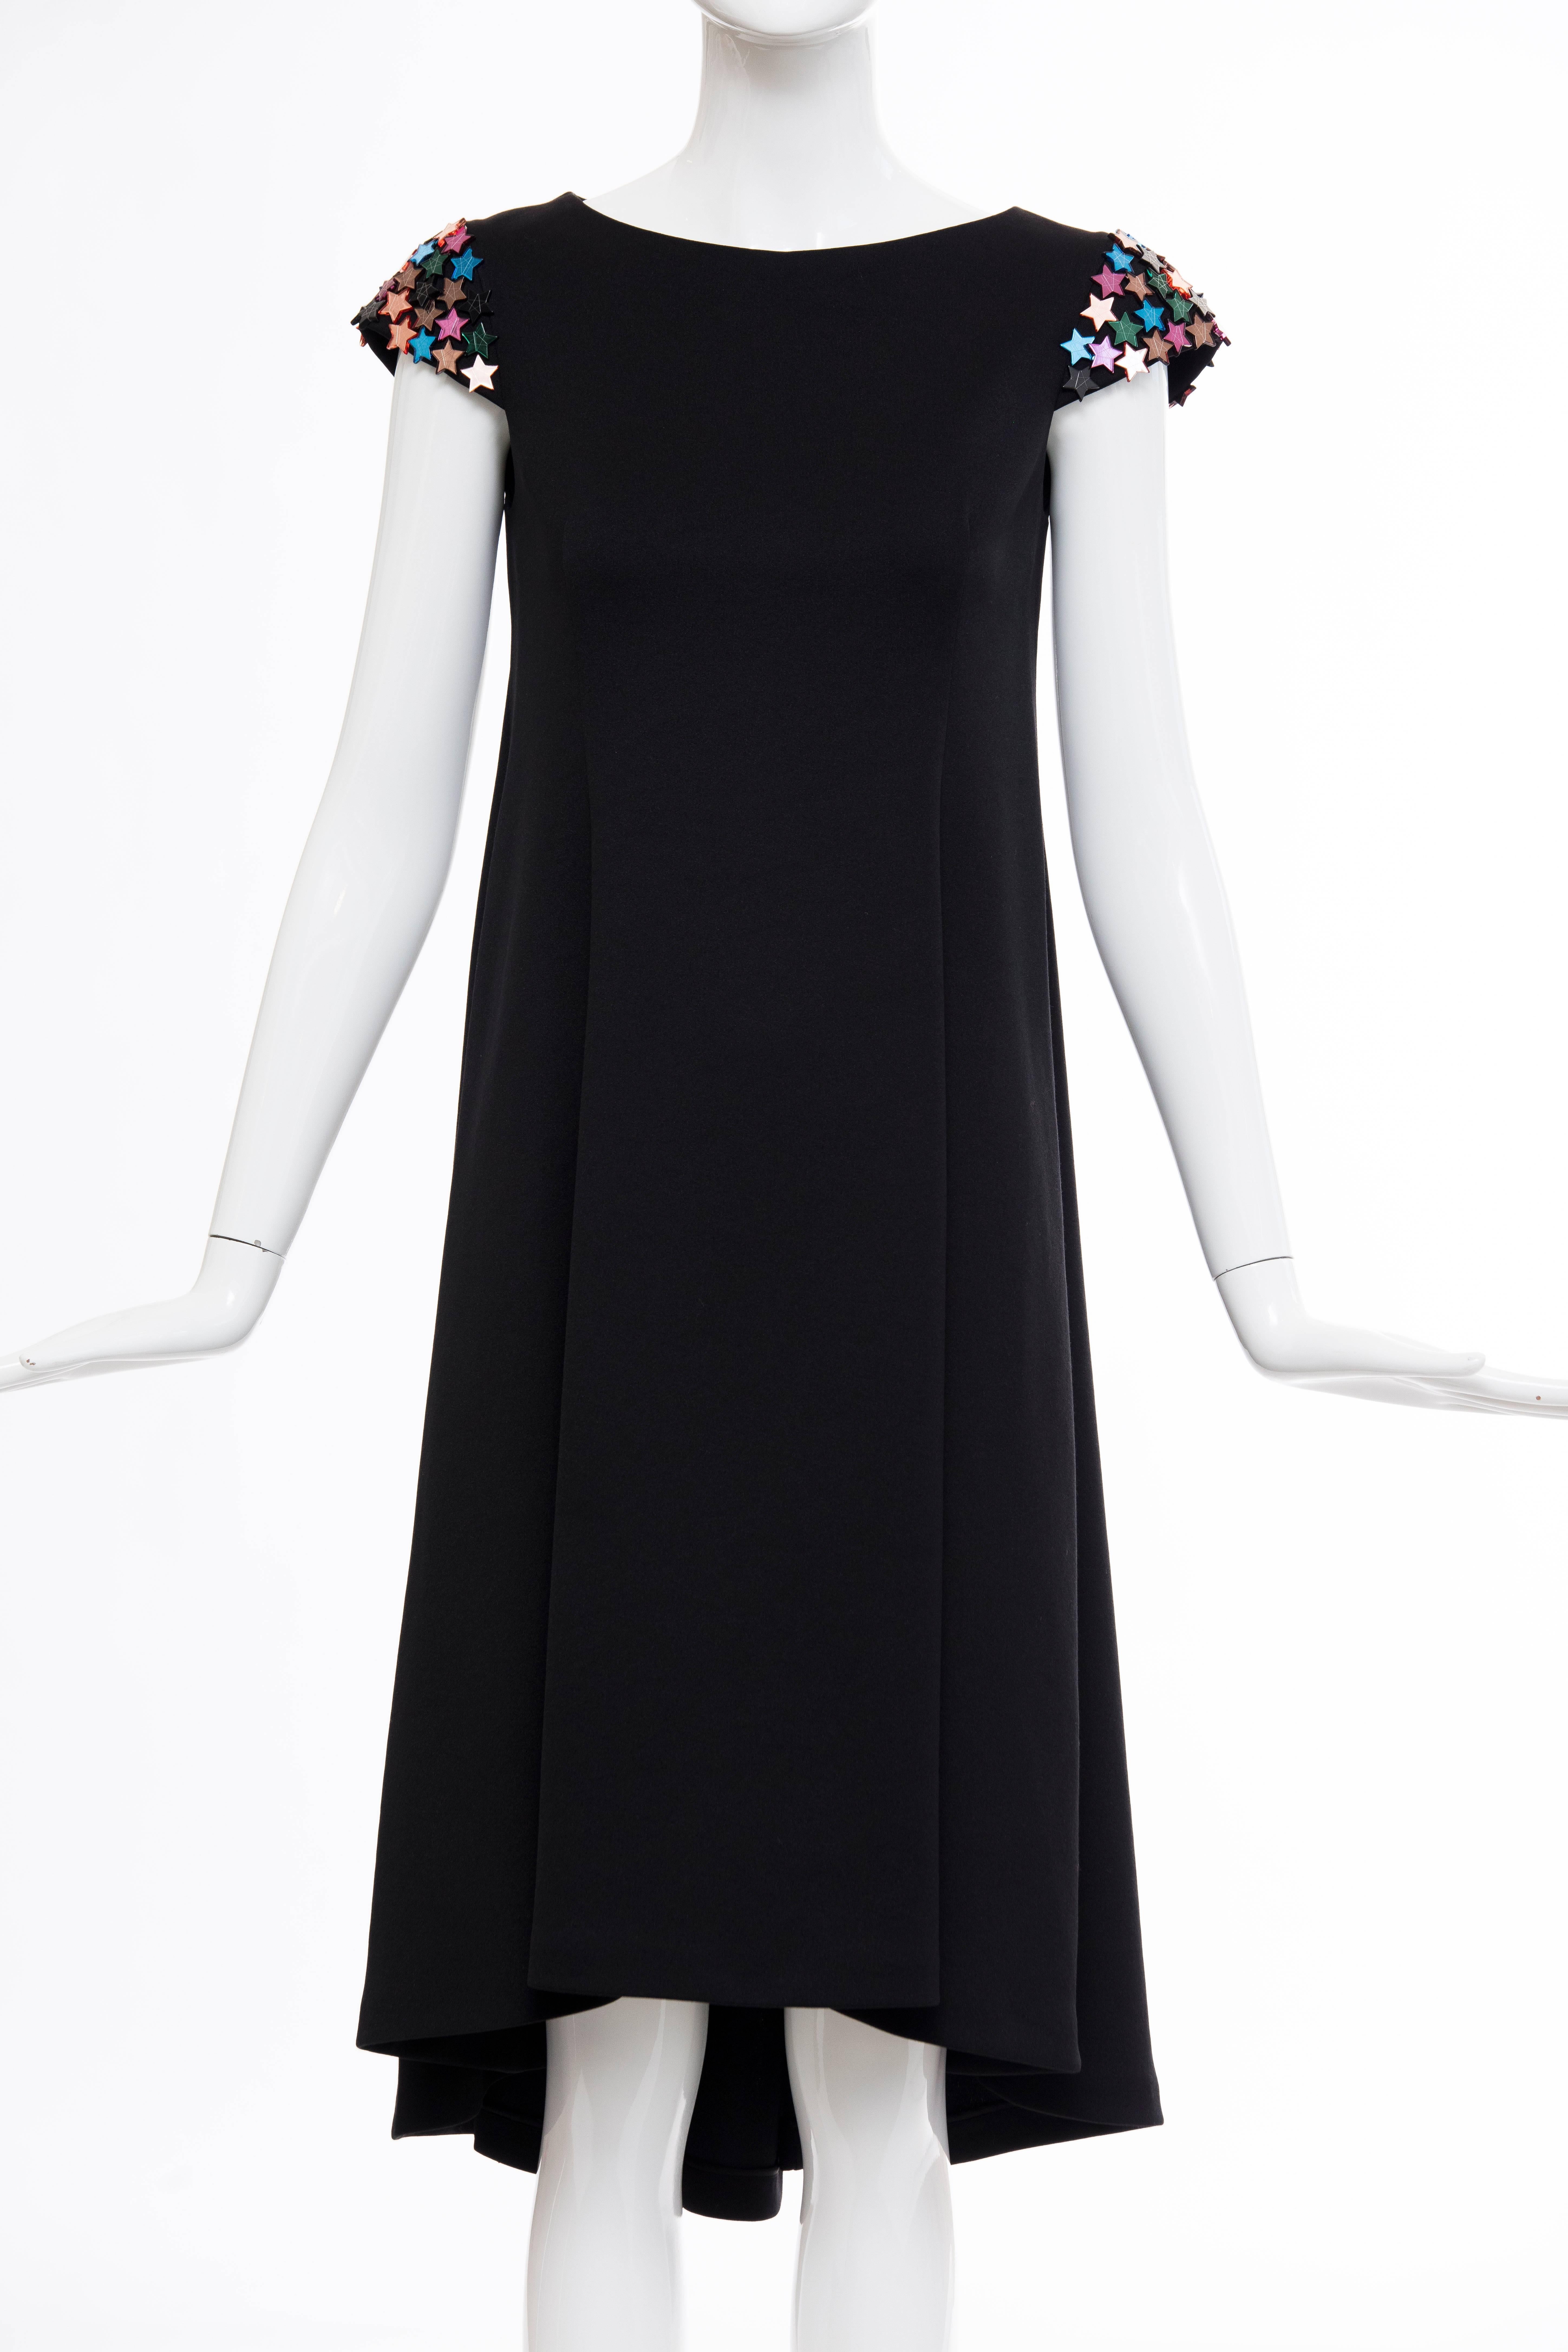 Yves Saint Laurent blackA-line dress with bateau neckline, seam detailing throughout, multicolor star adornments at sleeves and zip closure at center back.